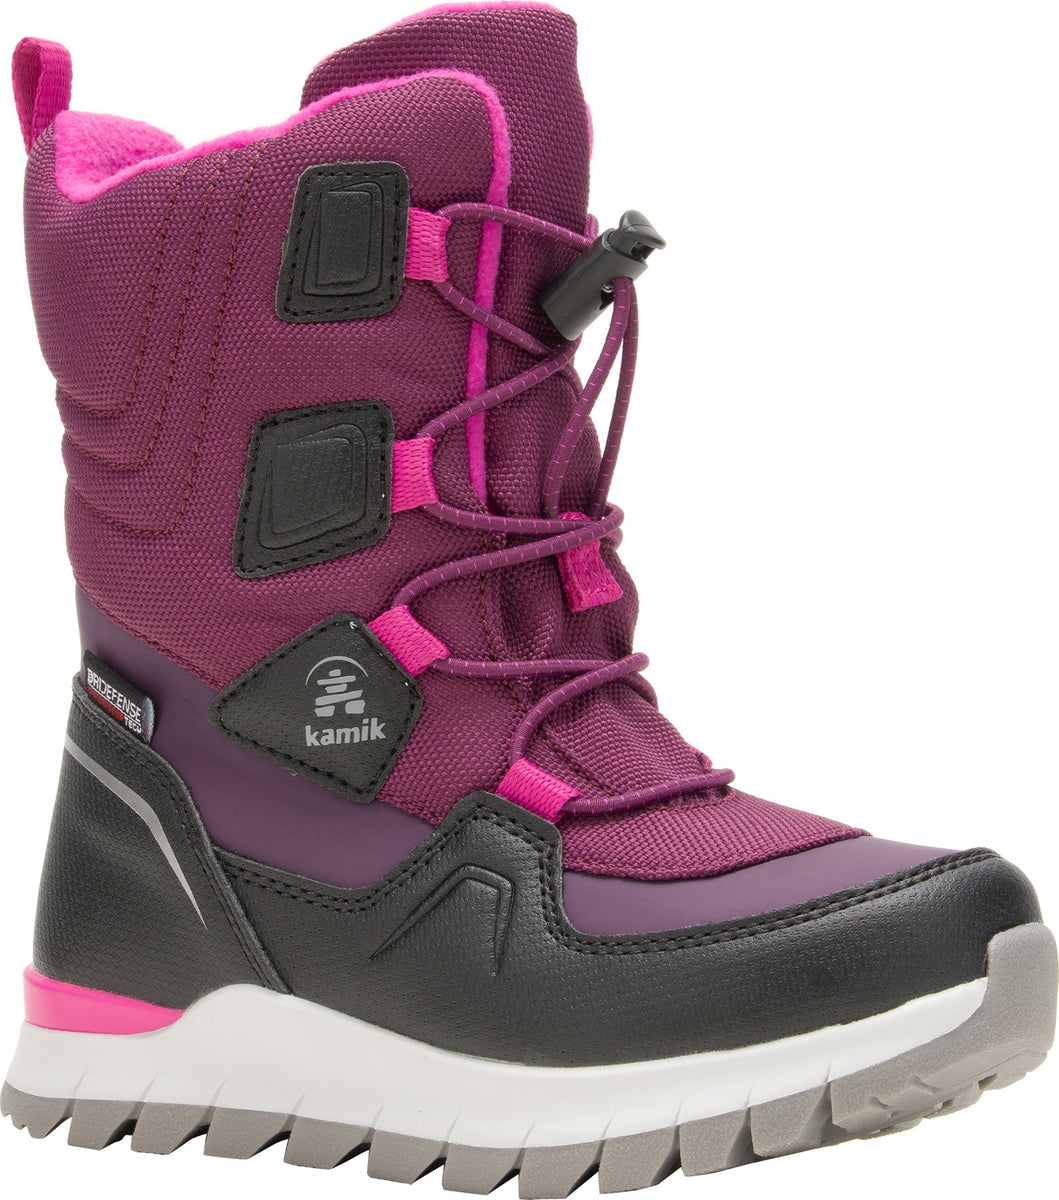 Kamik Bouncer 2 Insulated Boots - Kids | Altitude Sports